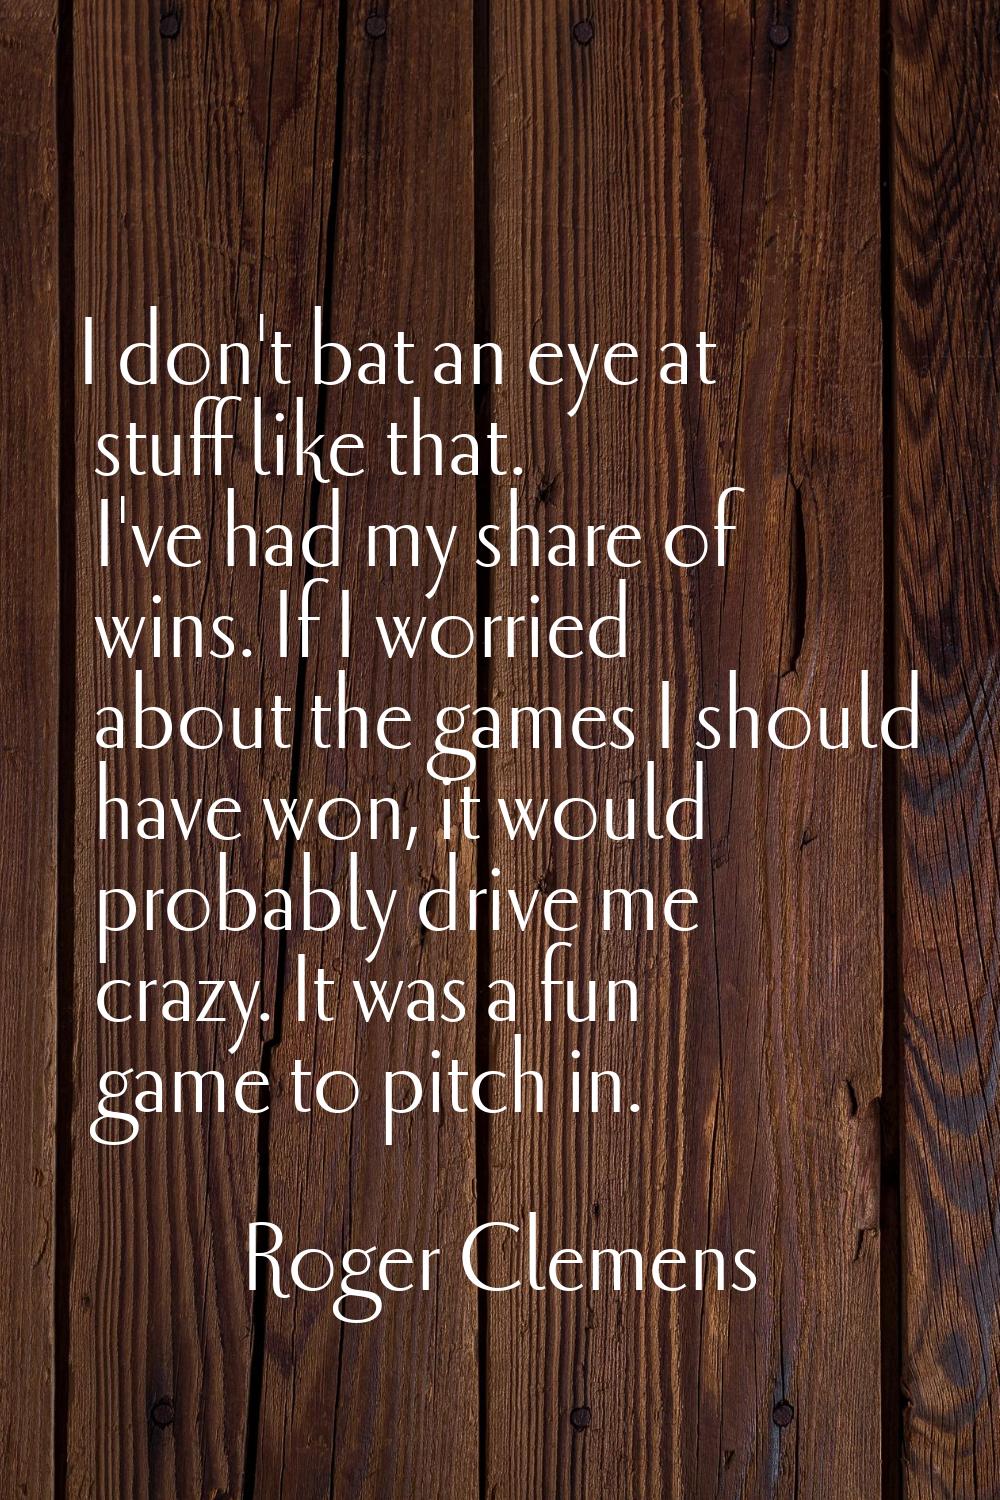 I don't bat an eye at stuff like that. I've had my share of wins. If I worried about the games I sh